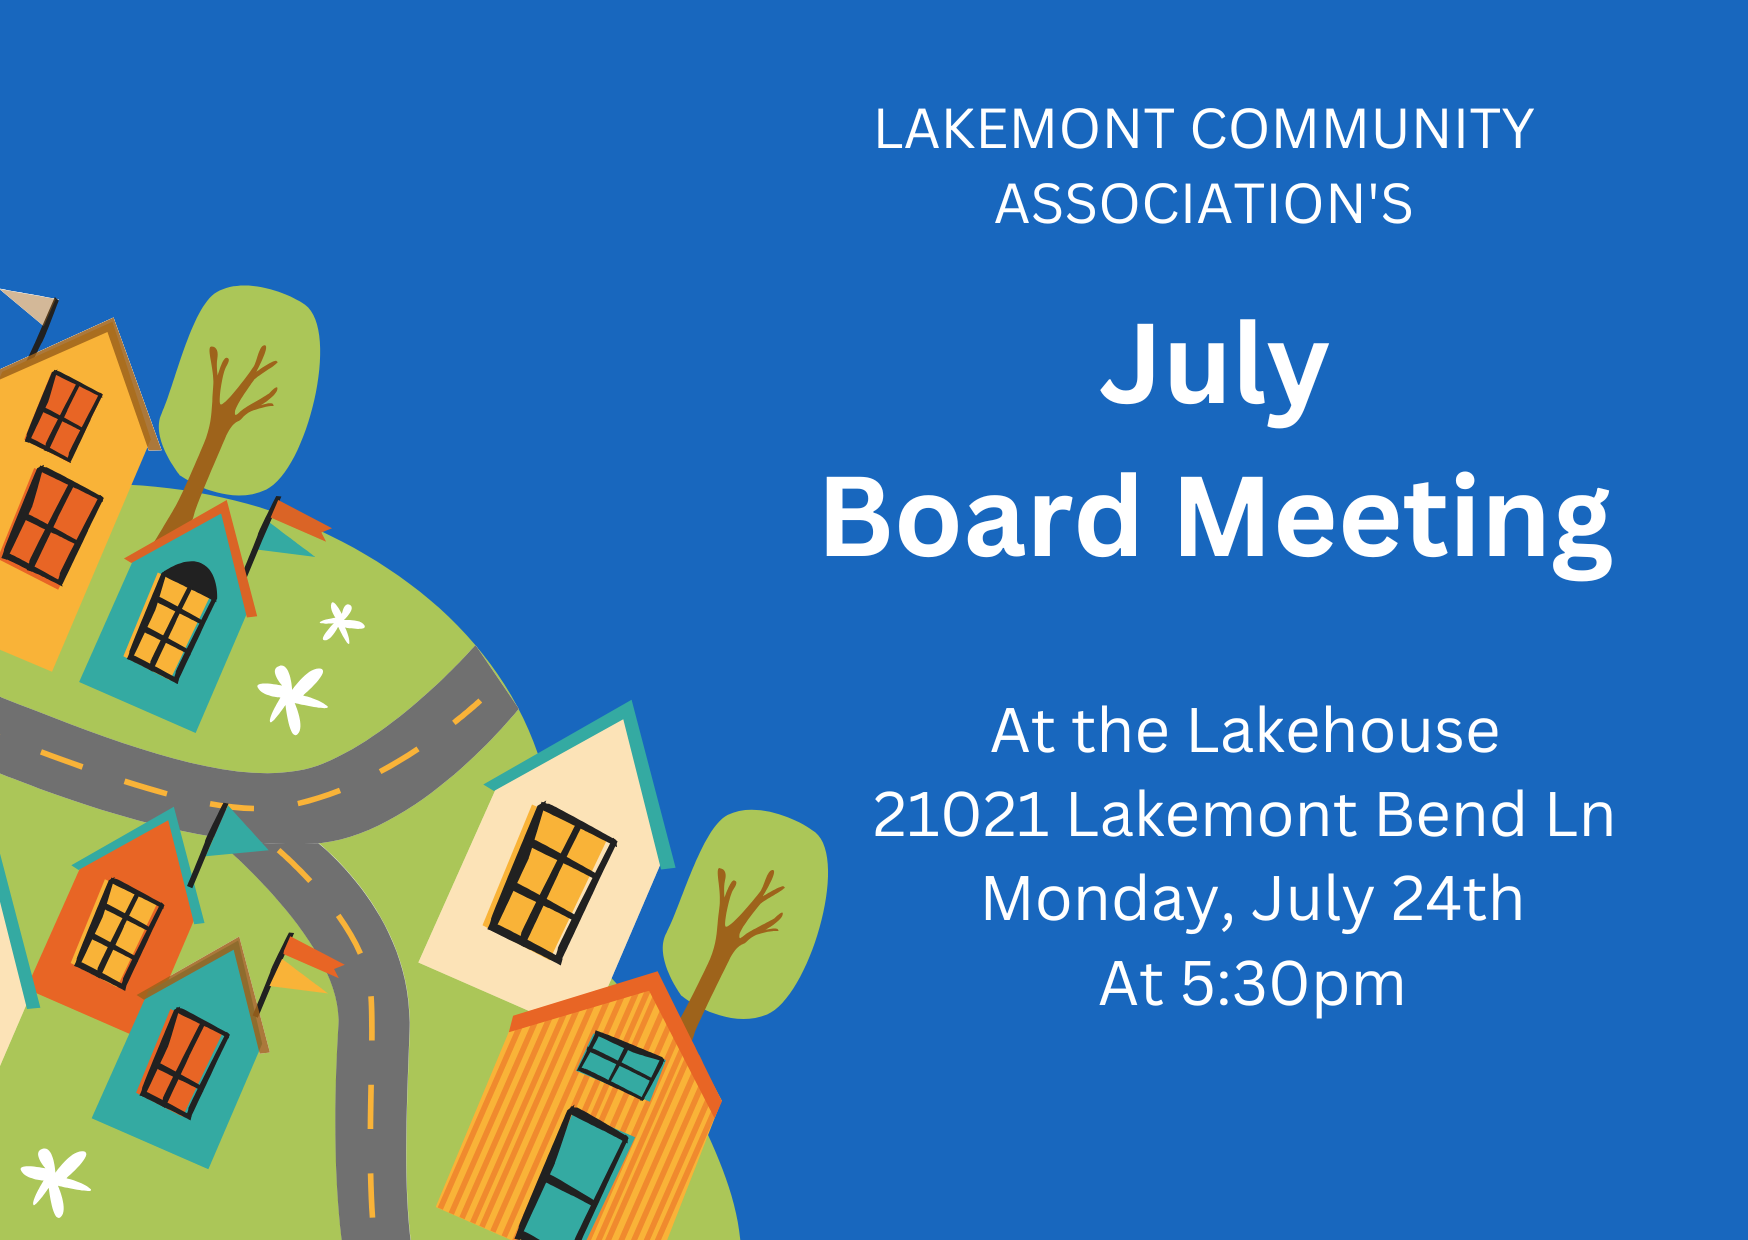 July Board Meeting Now In-Person